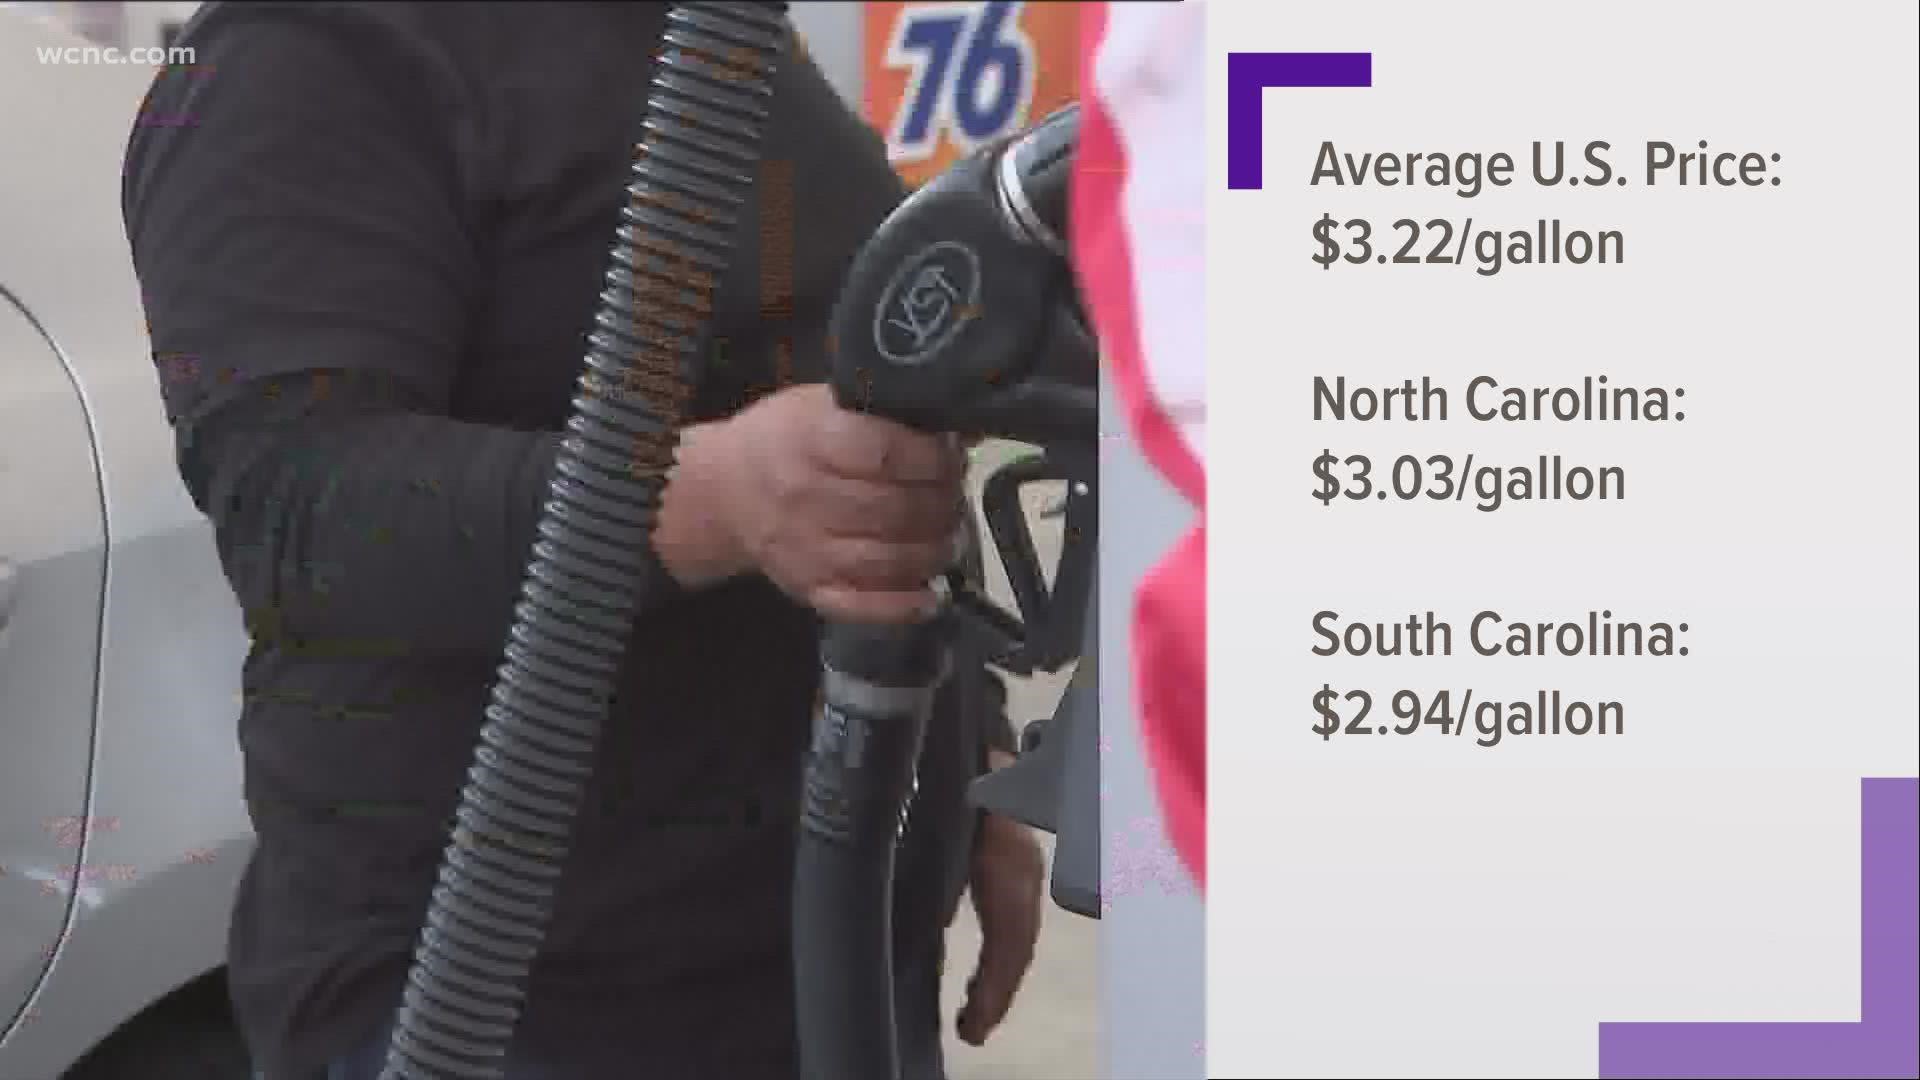 According to AAA, the average U.S. price for a gallon of gas rose to $3.22. In North Carolina, the average cost is $3.03. In South Carolina, it runs around $2.94.